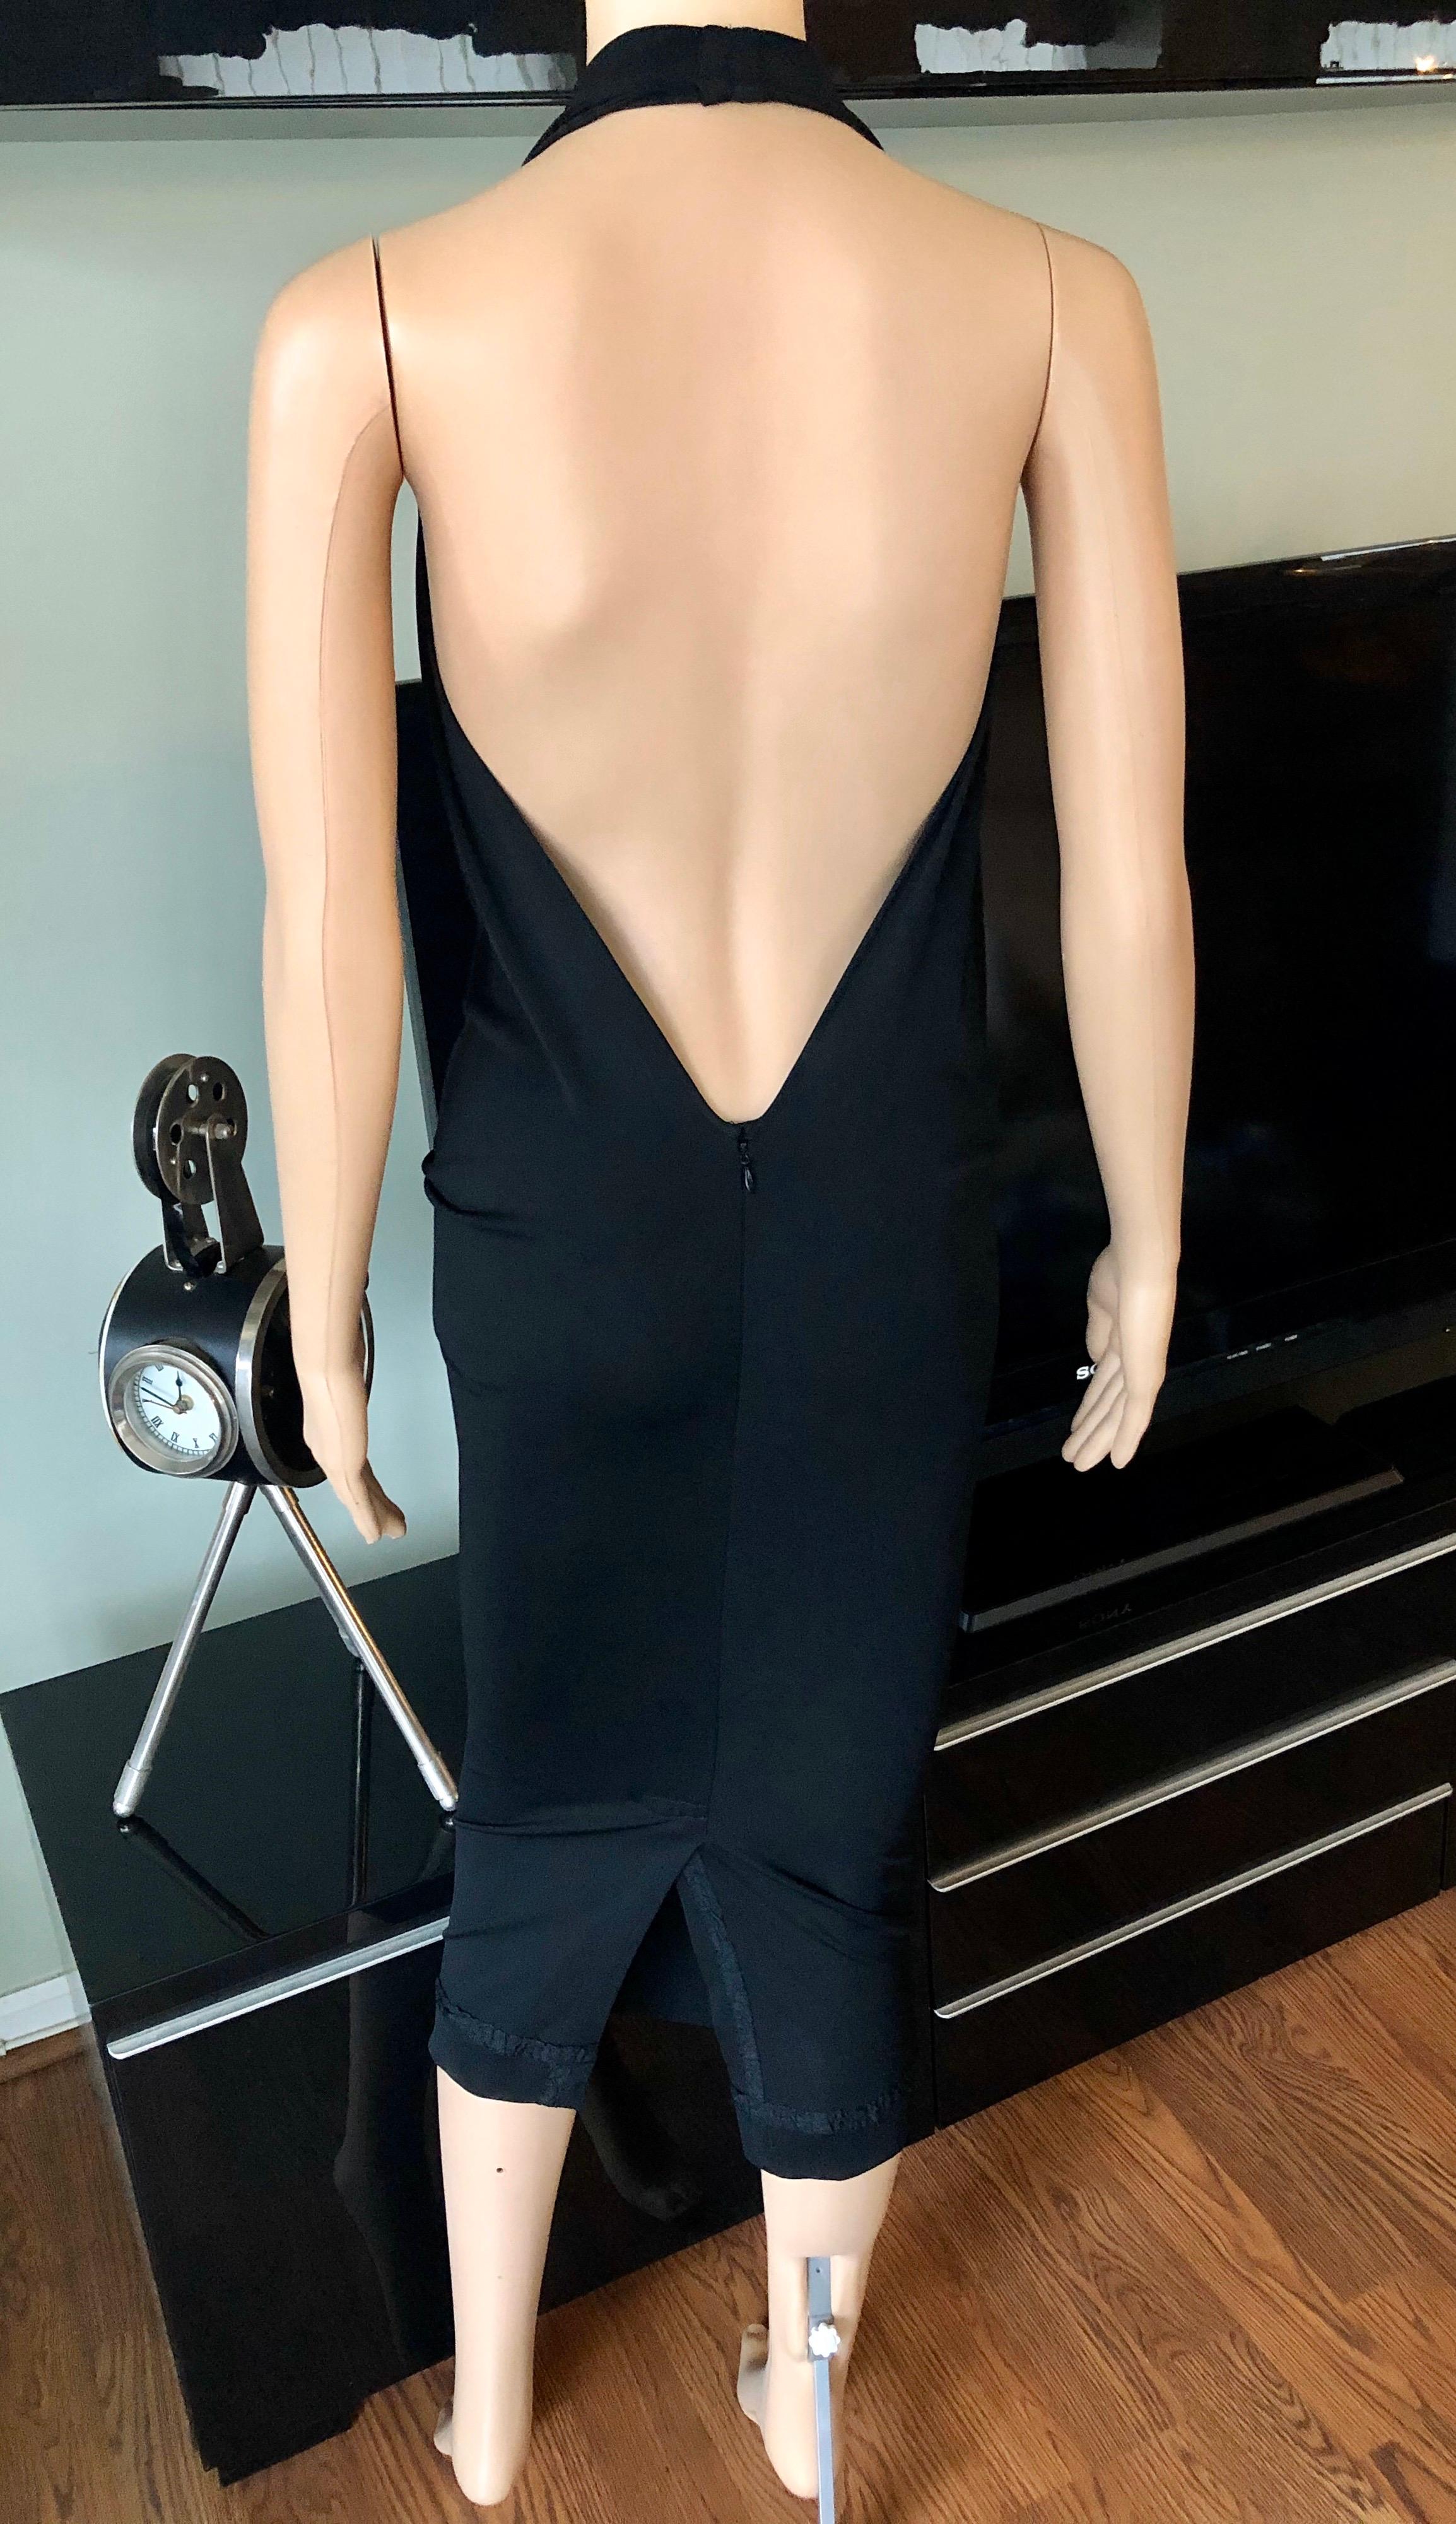 Jean Paul Gaultier Plunging Neckline Draped Halter Open Back Black Dress XS/S

Jean Paul Gaultier draped halter dress featuring plunging neckline, open back and zip closure at back. Please note size tag has been removed, size is estimated from